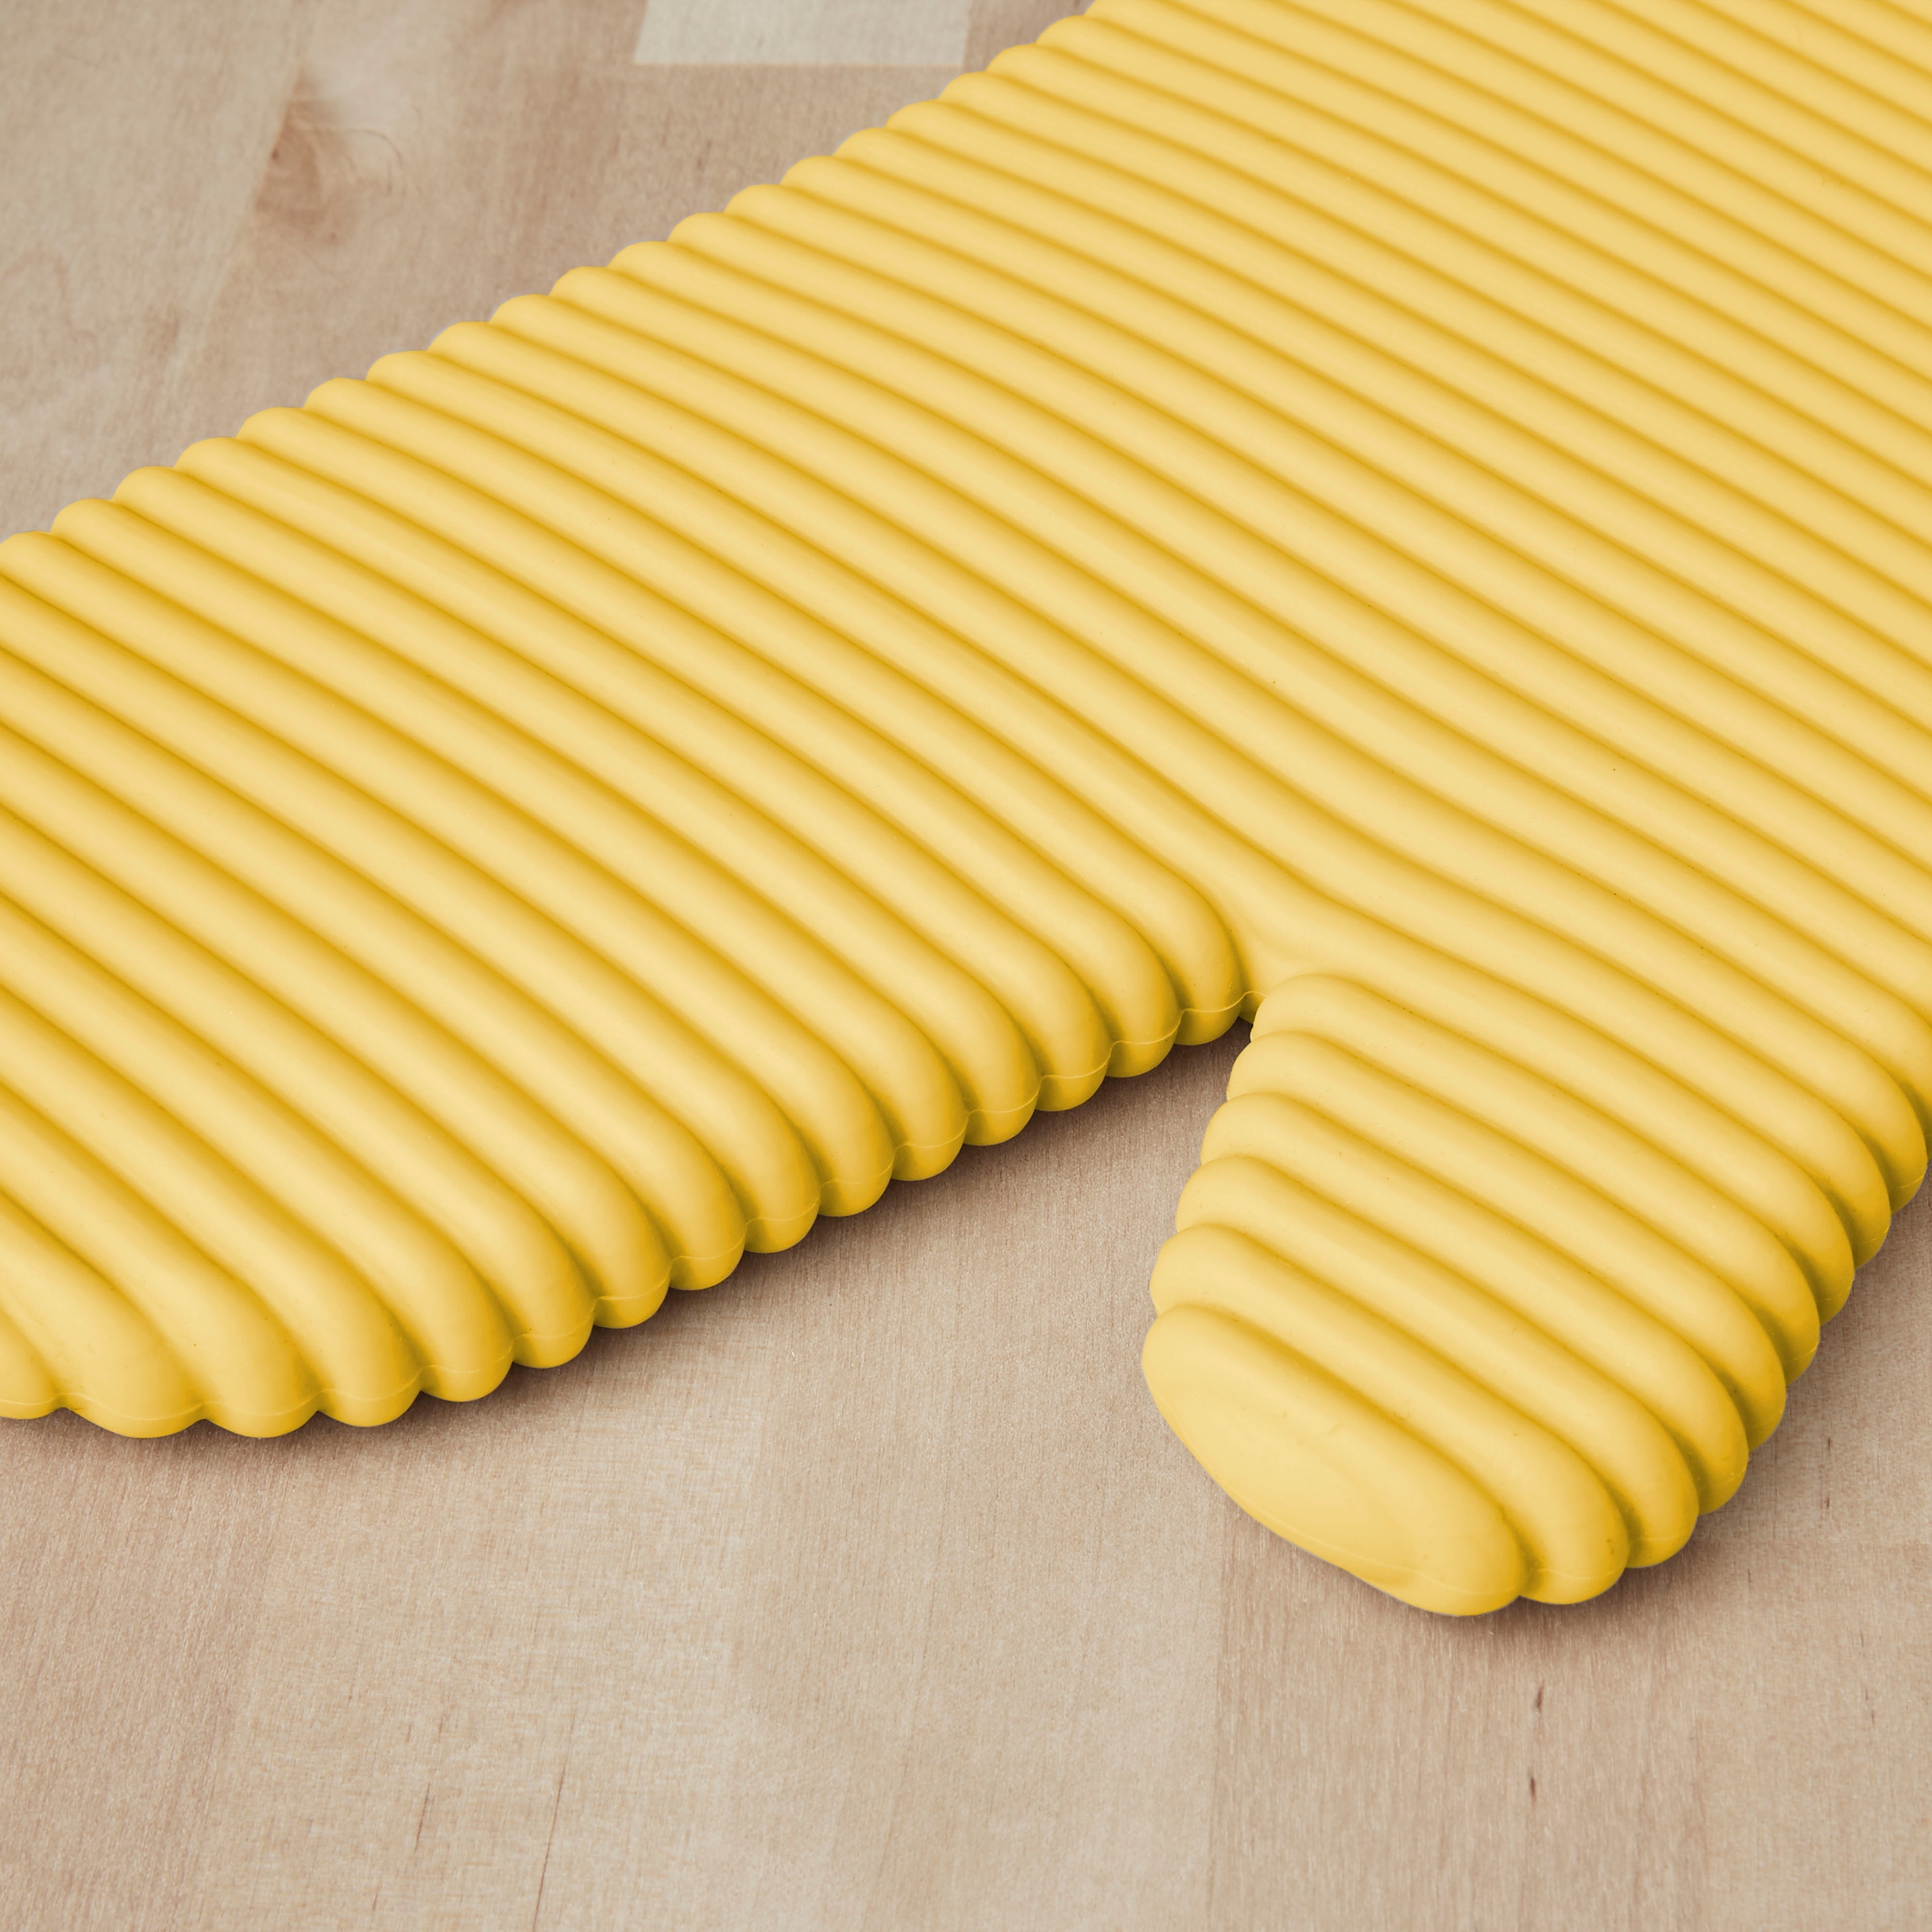 https://ak1.ostkcdn.com/images/products/is/images/direct/c7265d5898983a01b6a933dbd600de724e4a43f5/KitchenAid-Ribbed-Soft-Silicone-Oven-Mitt-2-Pack-Set%2C-7.5%22x13%22.jpg